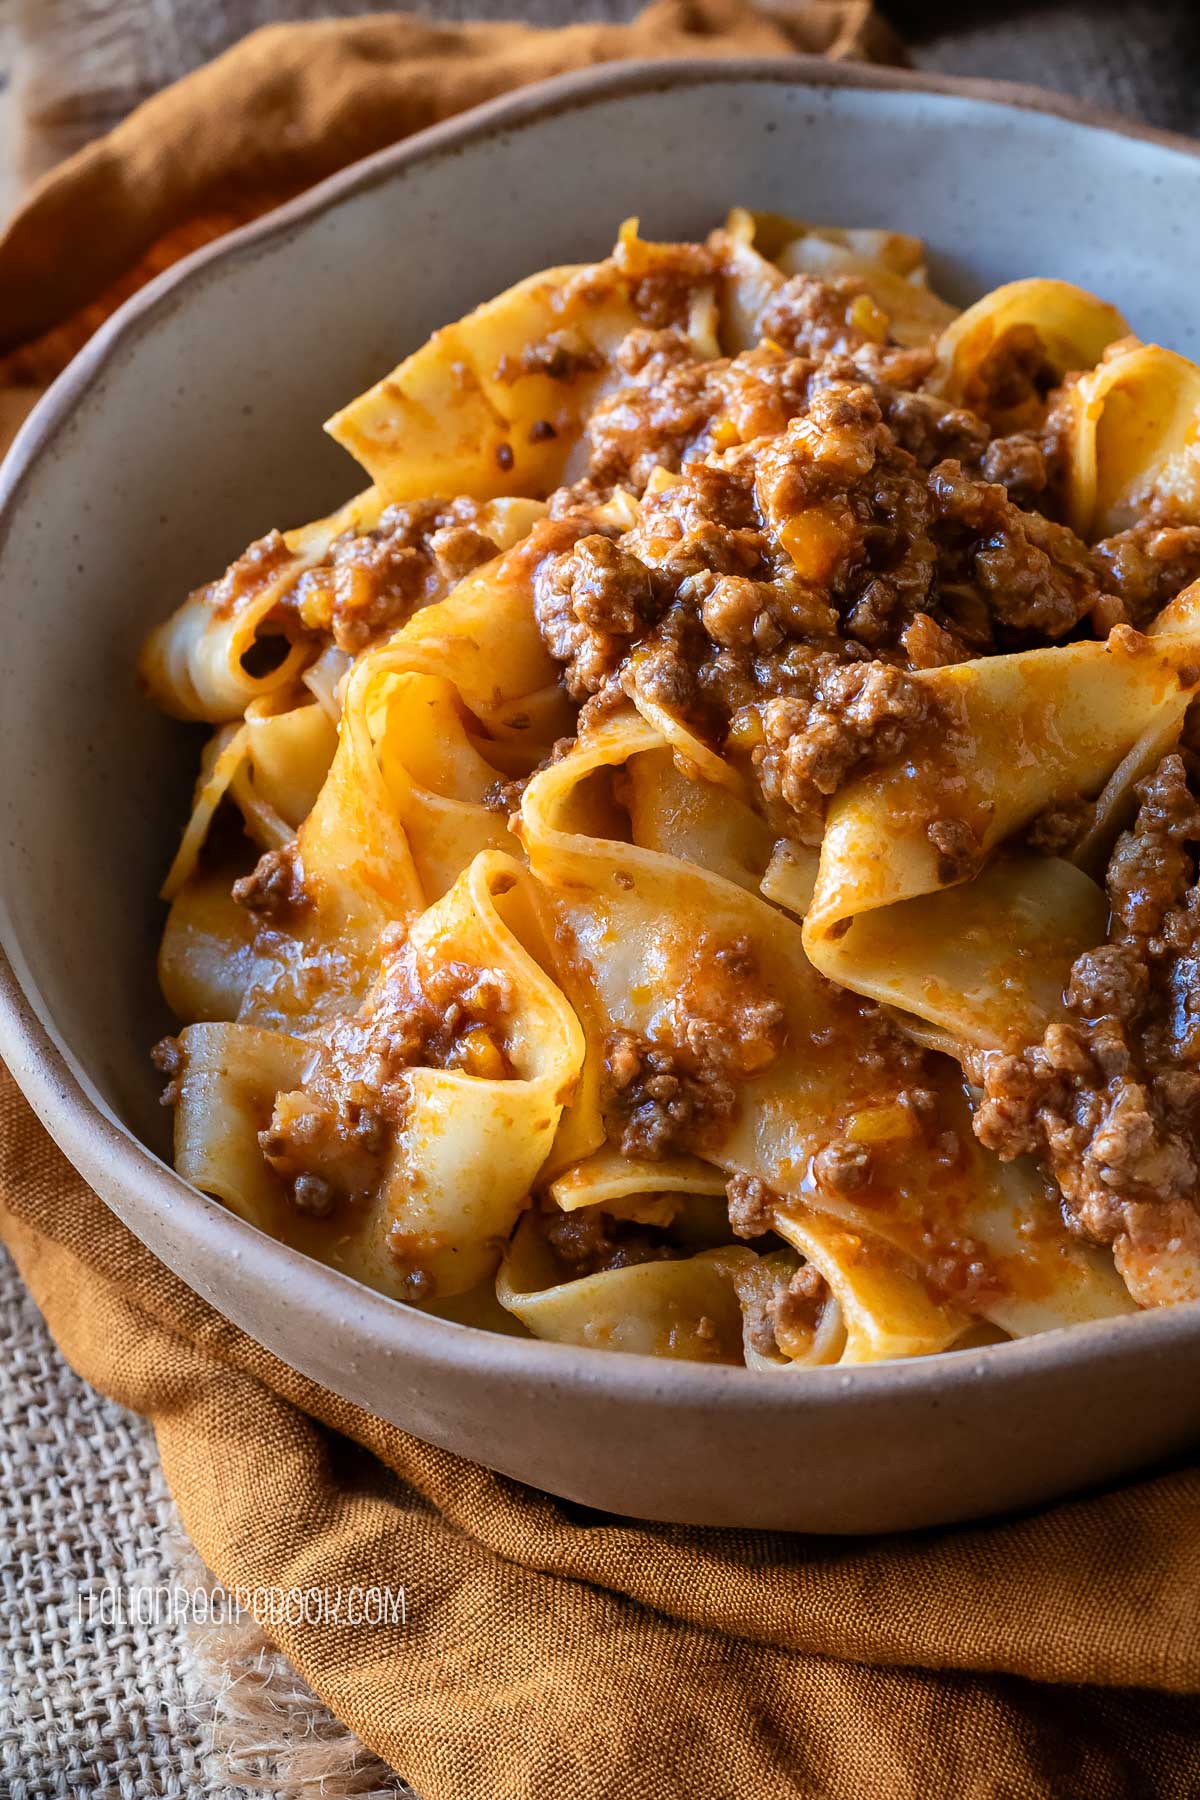 pappardelle alla bolognese in a bowl